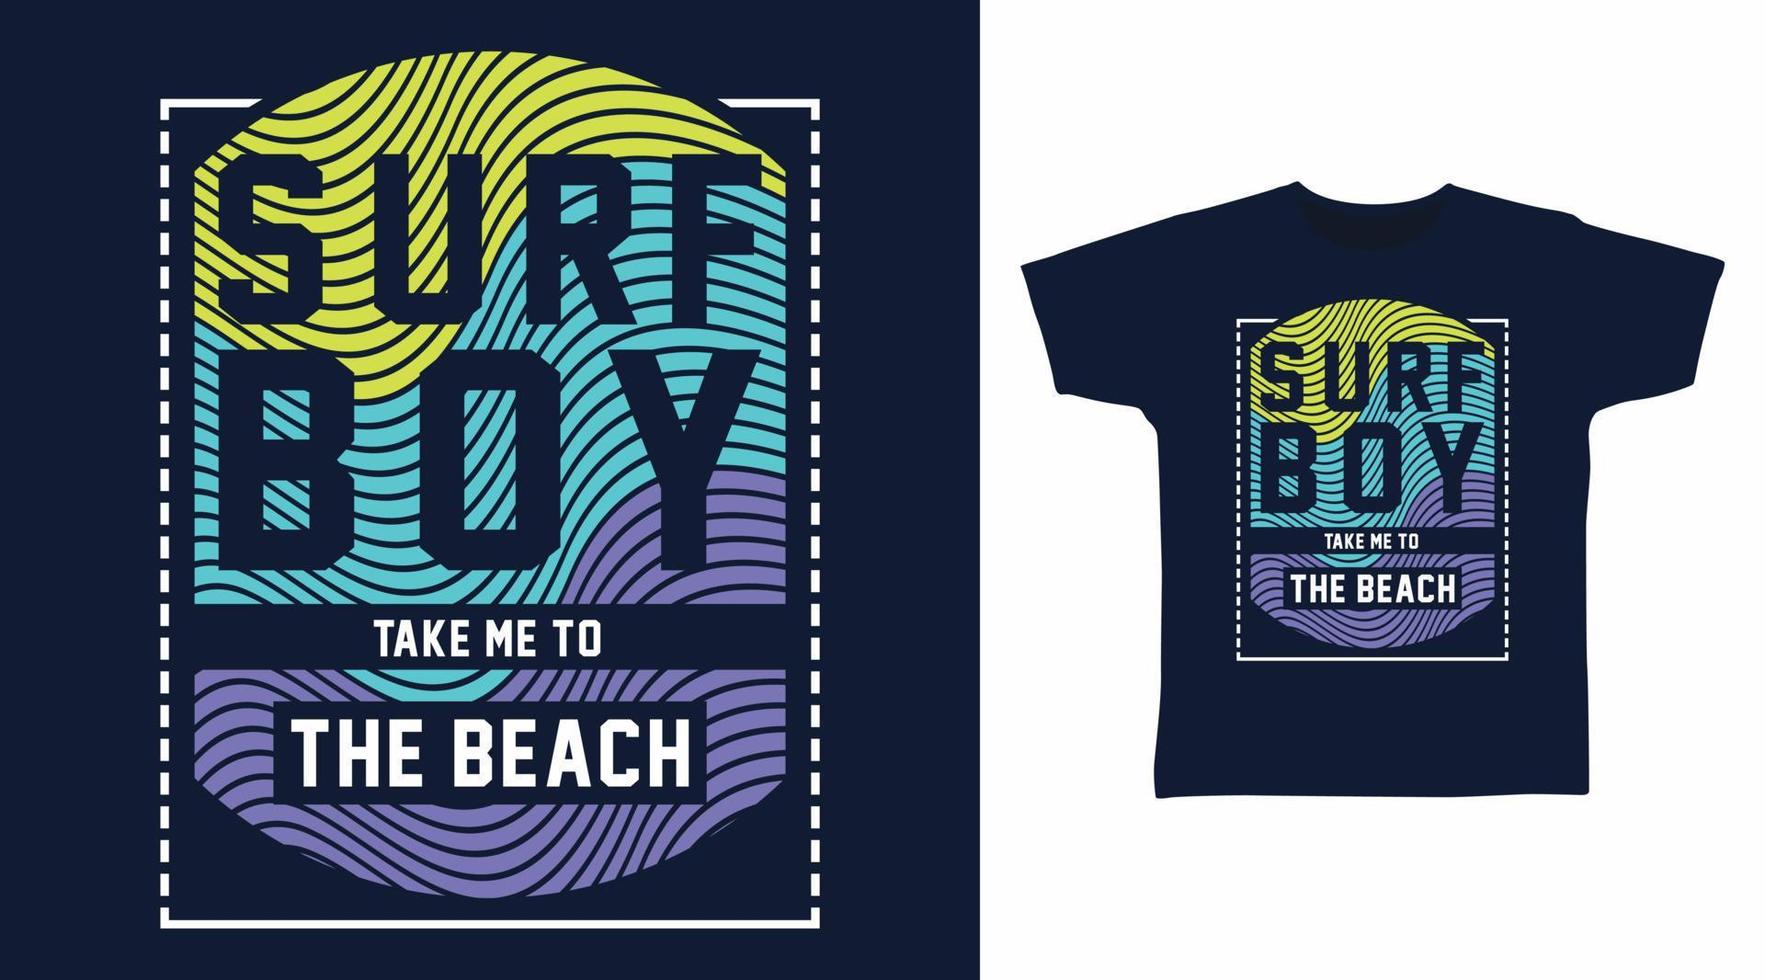 Surf boy typography design vector with line art illustration, ready for print on t-shirt.